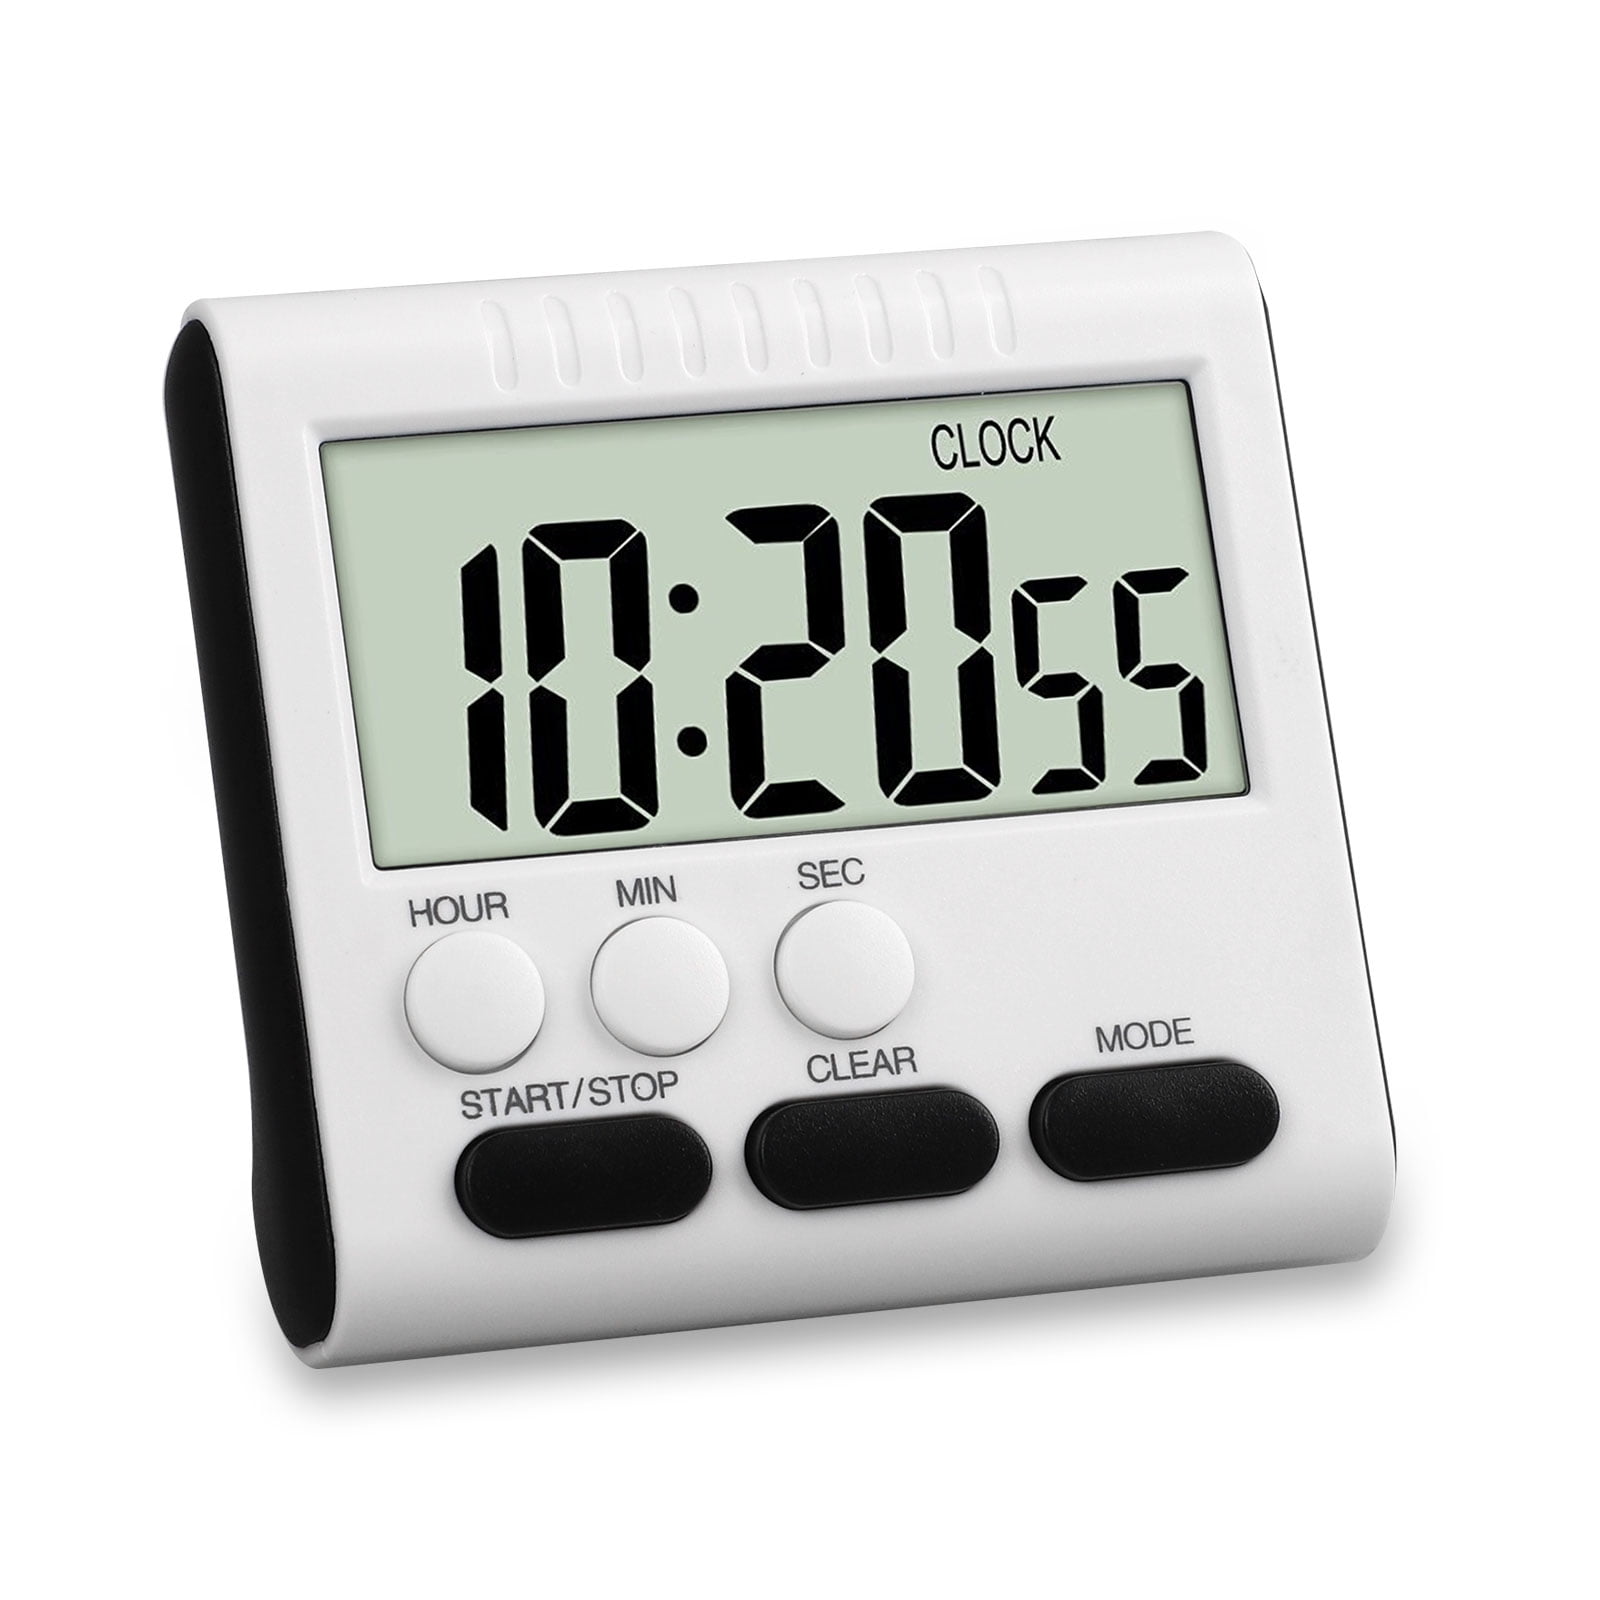 Portable Dual Display Channel Digital LCD Magnetic Countdown Clock Alarm Timer